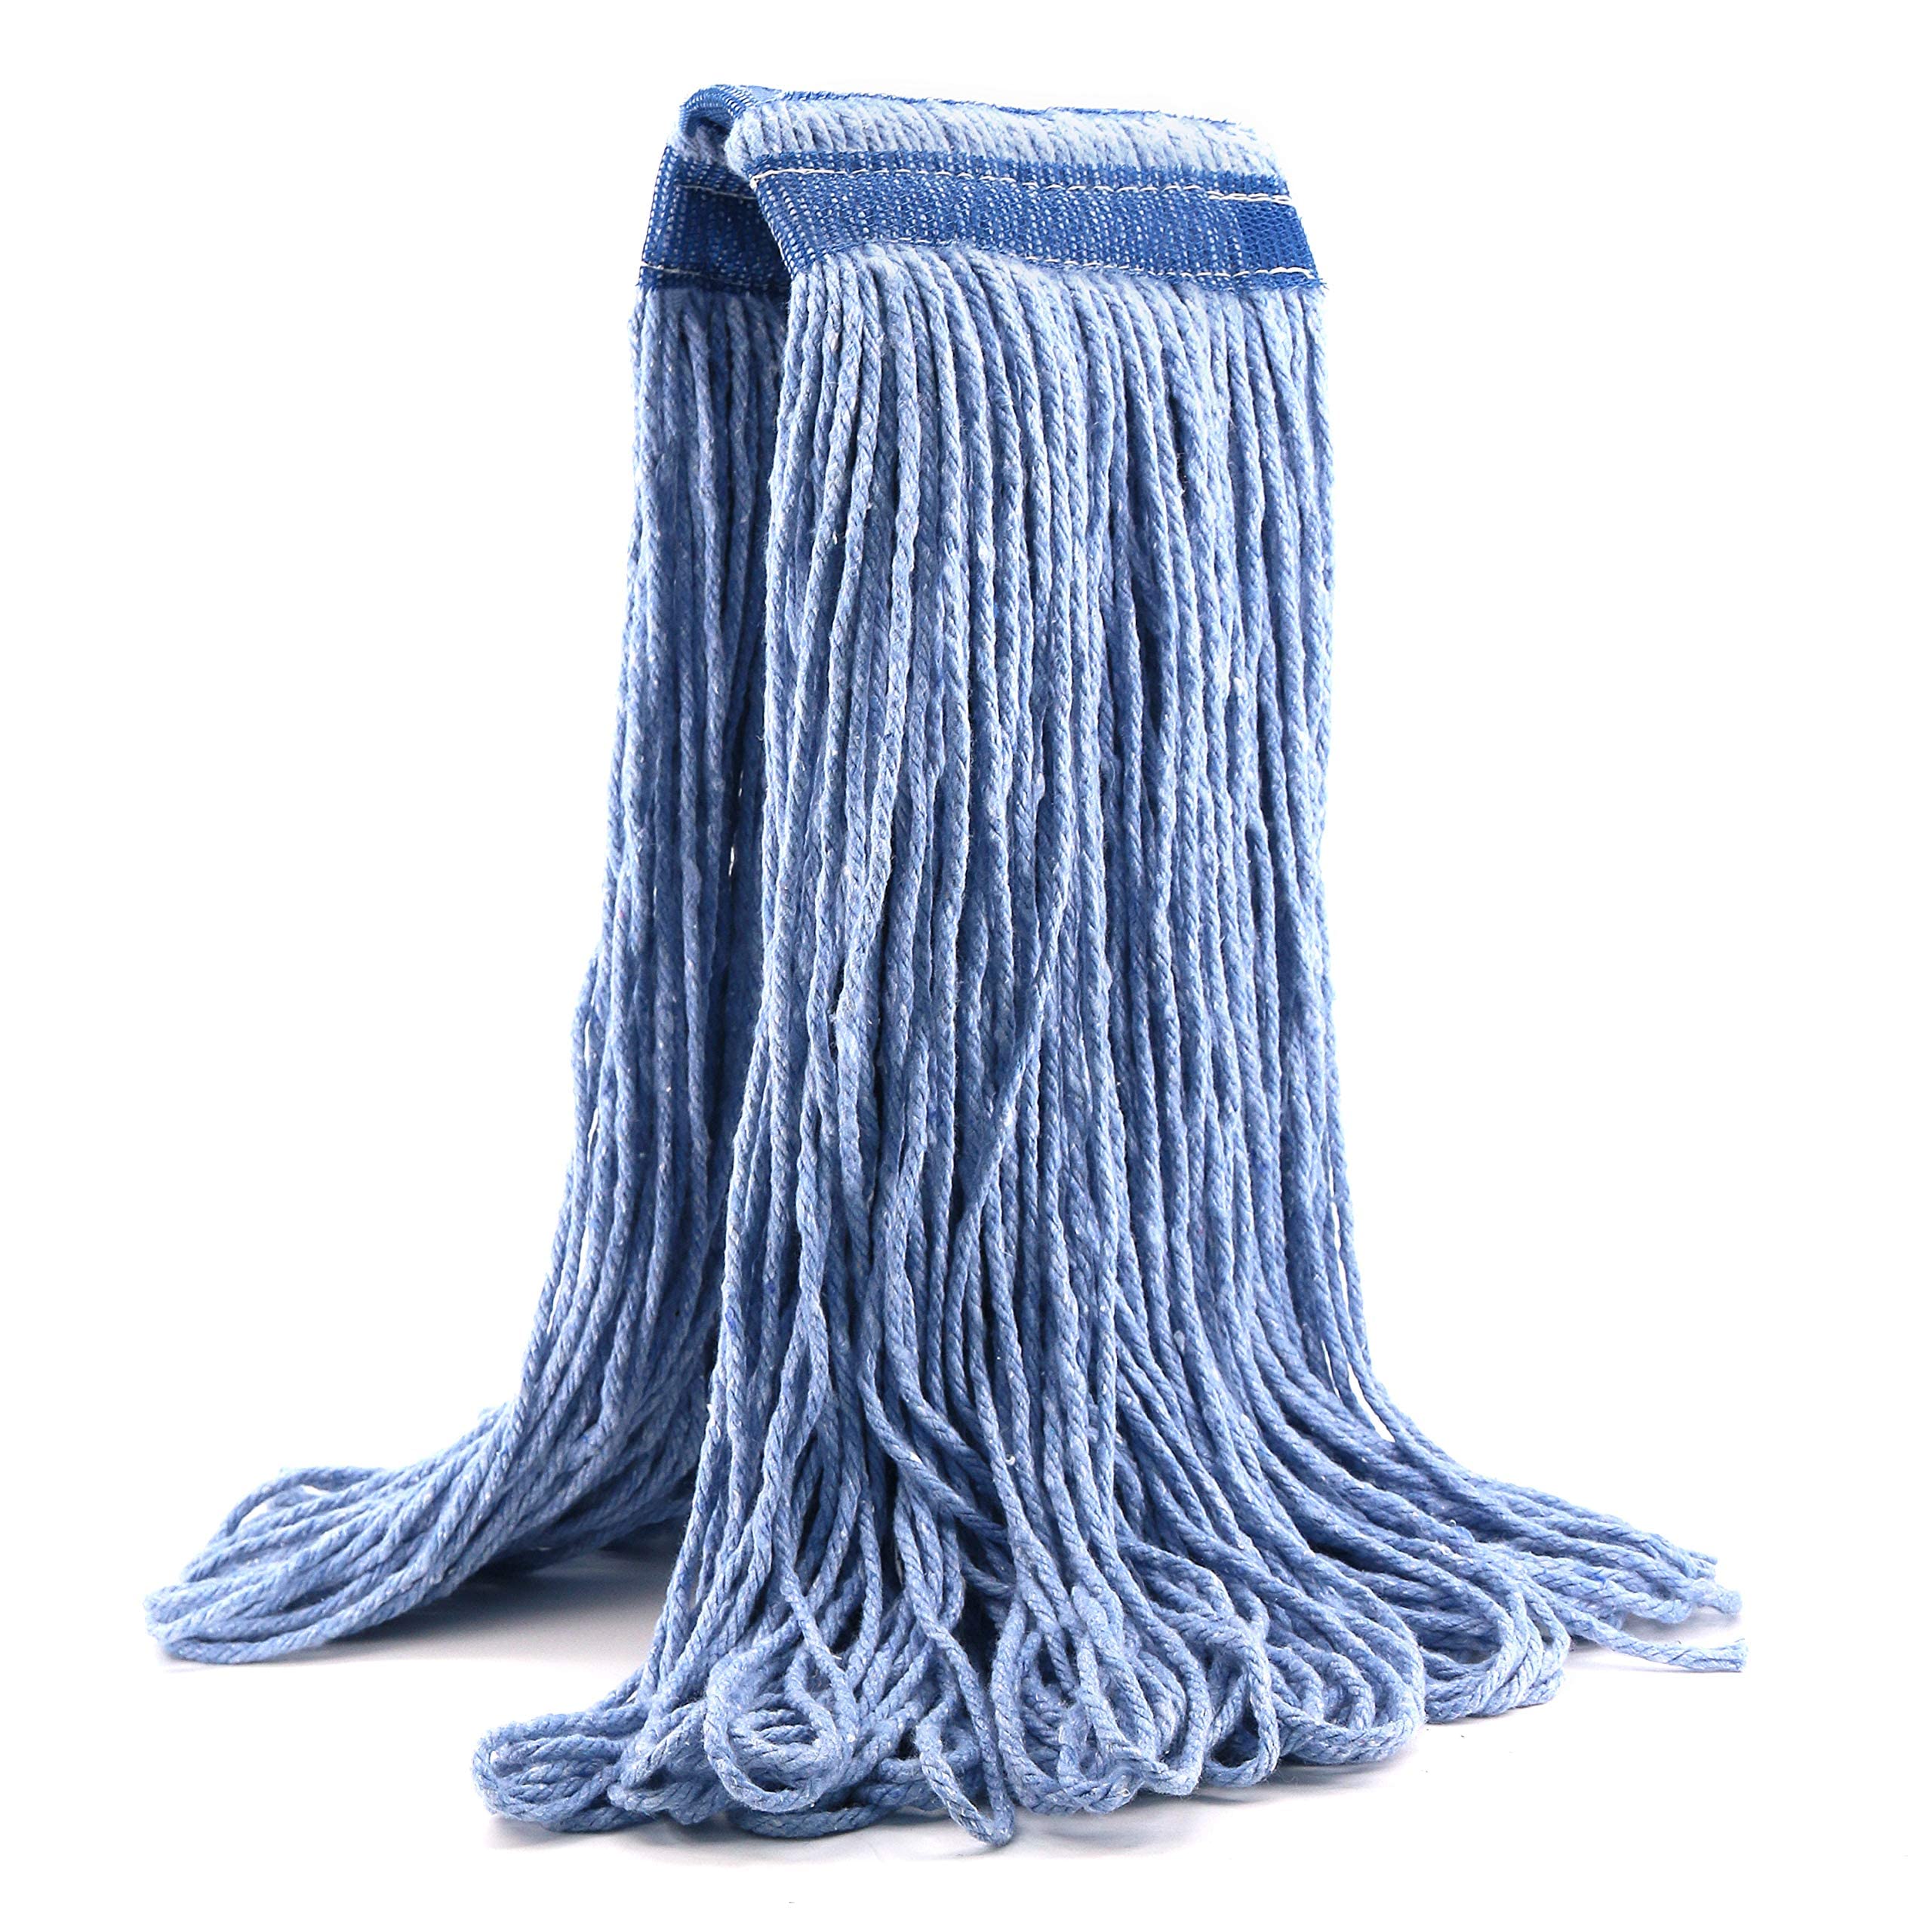 24 oz Loop-End Cotton Mop Head, Heavy Duty Mop Refills, 6 Inch Headband, Mop  Head Replacement for Home, Industrial and Commercial Use (Blue)